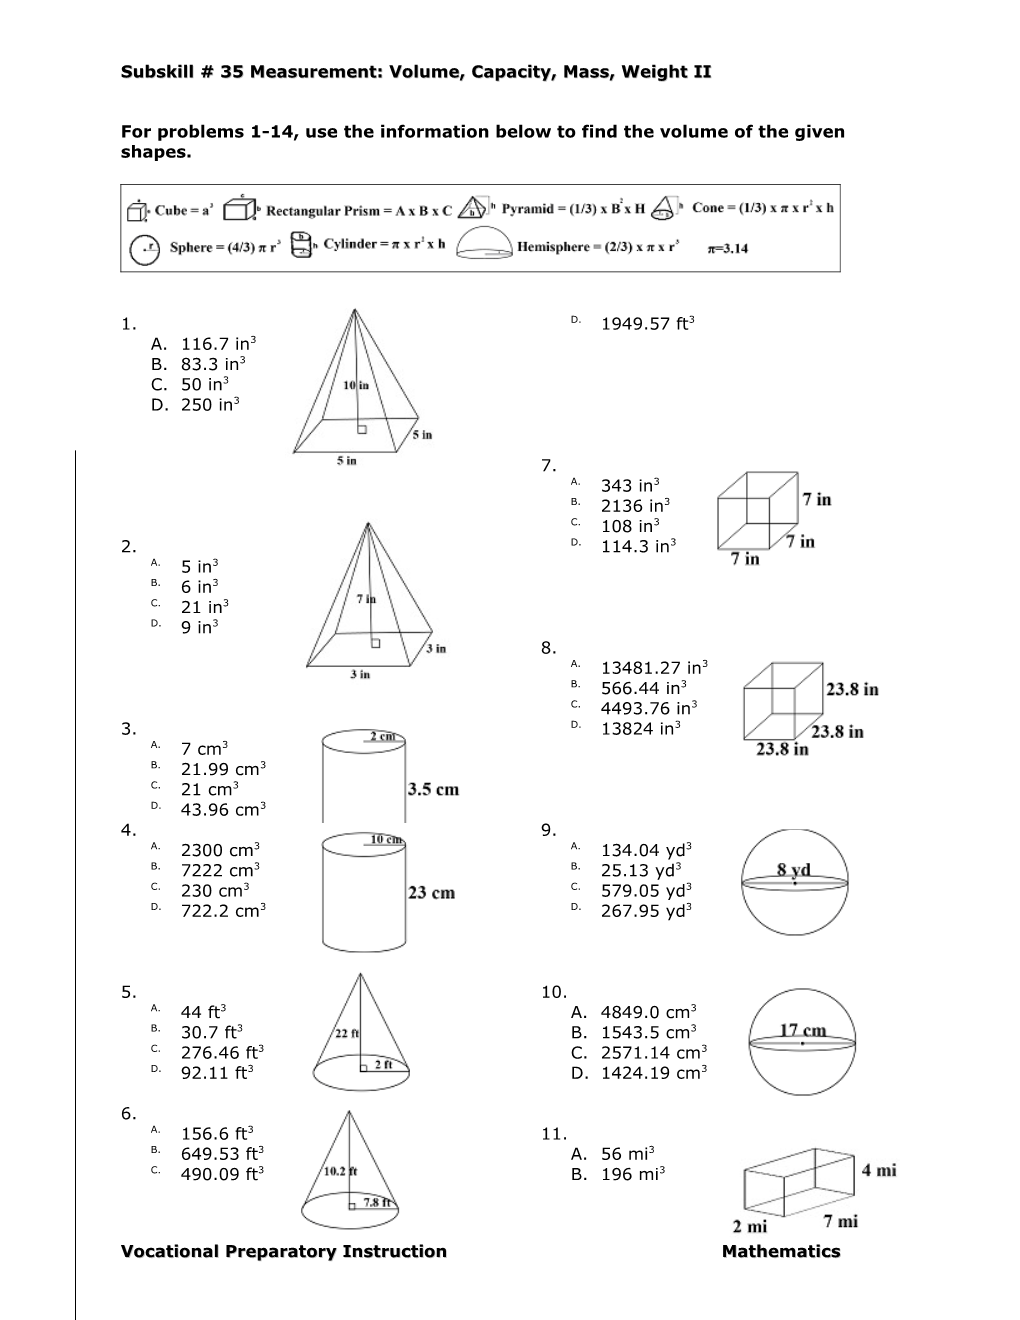 For Problems 1-14, Use the Information Below to Find the Volume of the Given Shapes